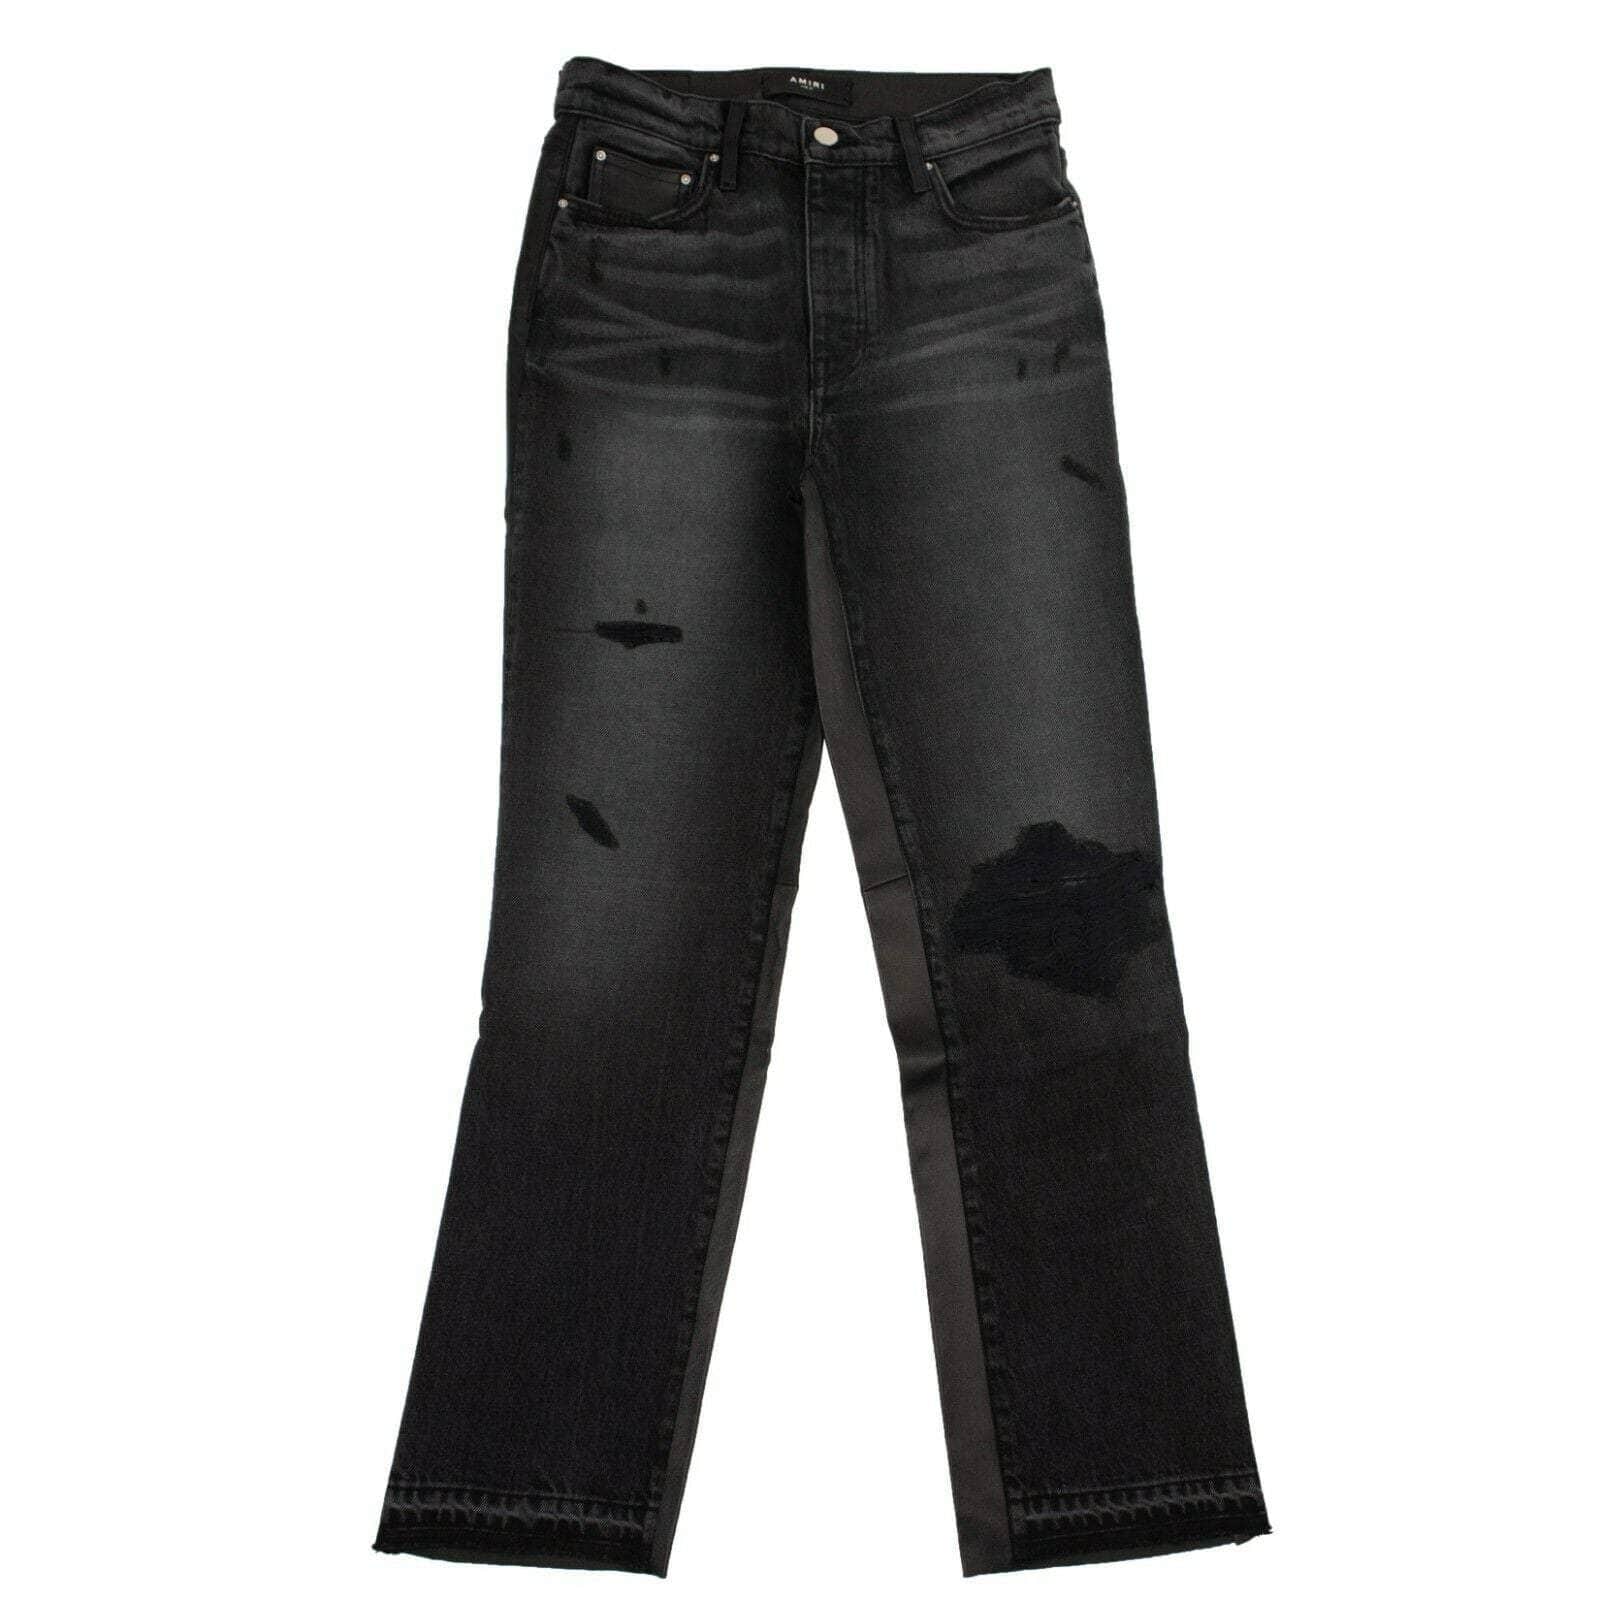 Amiri 1000-2000, amiri, channelenable-all, chicmi, couponcollection, gender-womens, main-clothing, size-27, womens-skinny-jeans Women's Black Leather Hybrid Cropped Jeans